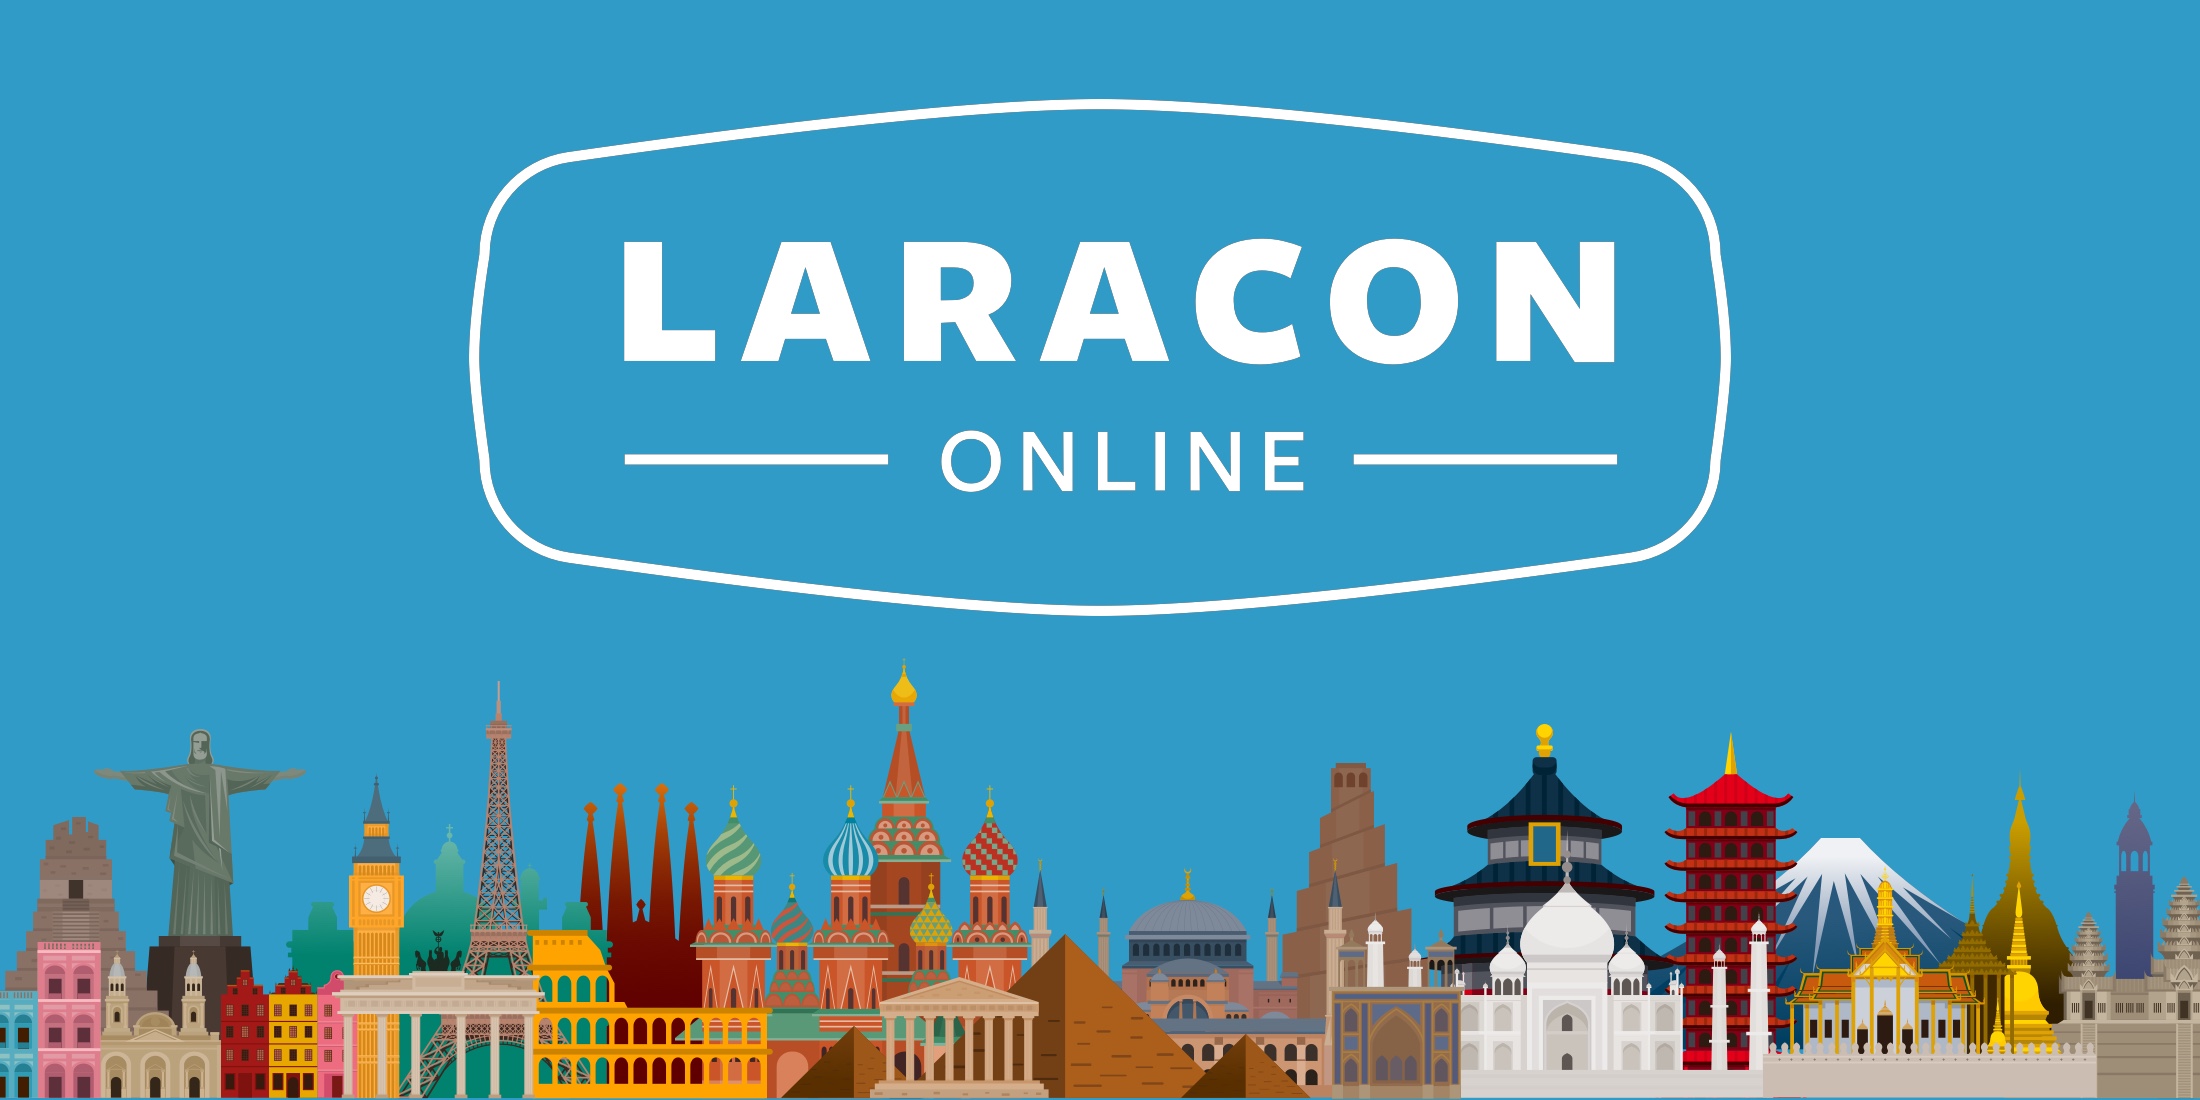 Laracon Online is this week image